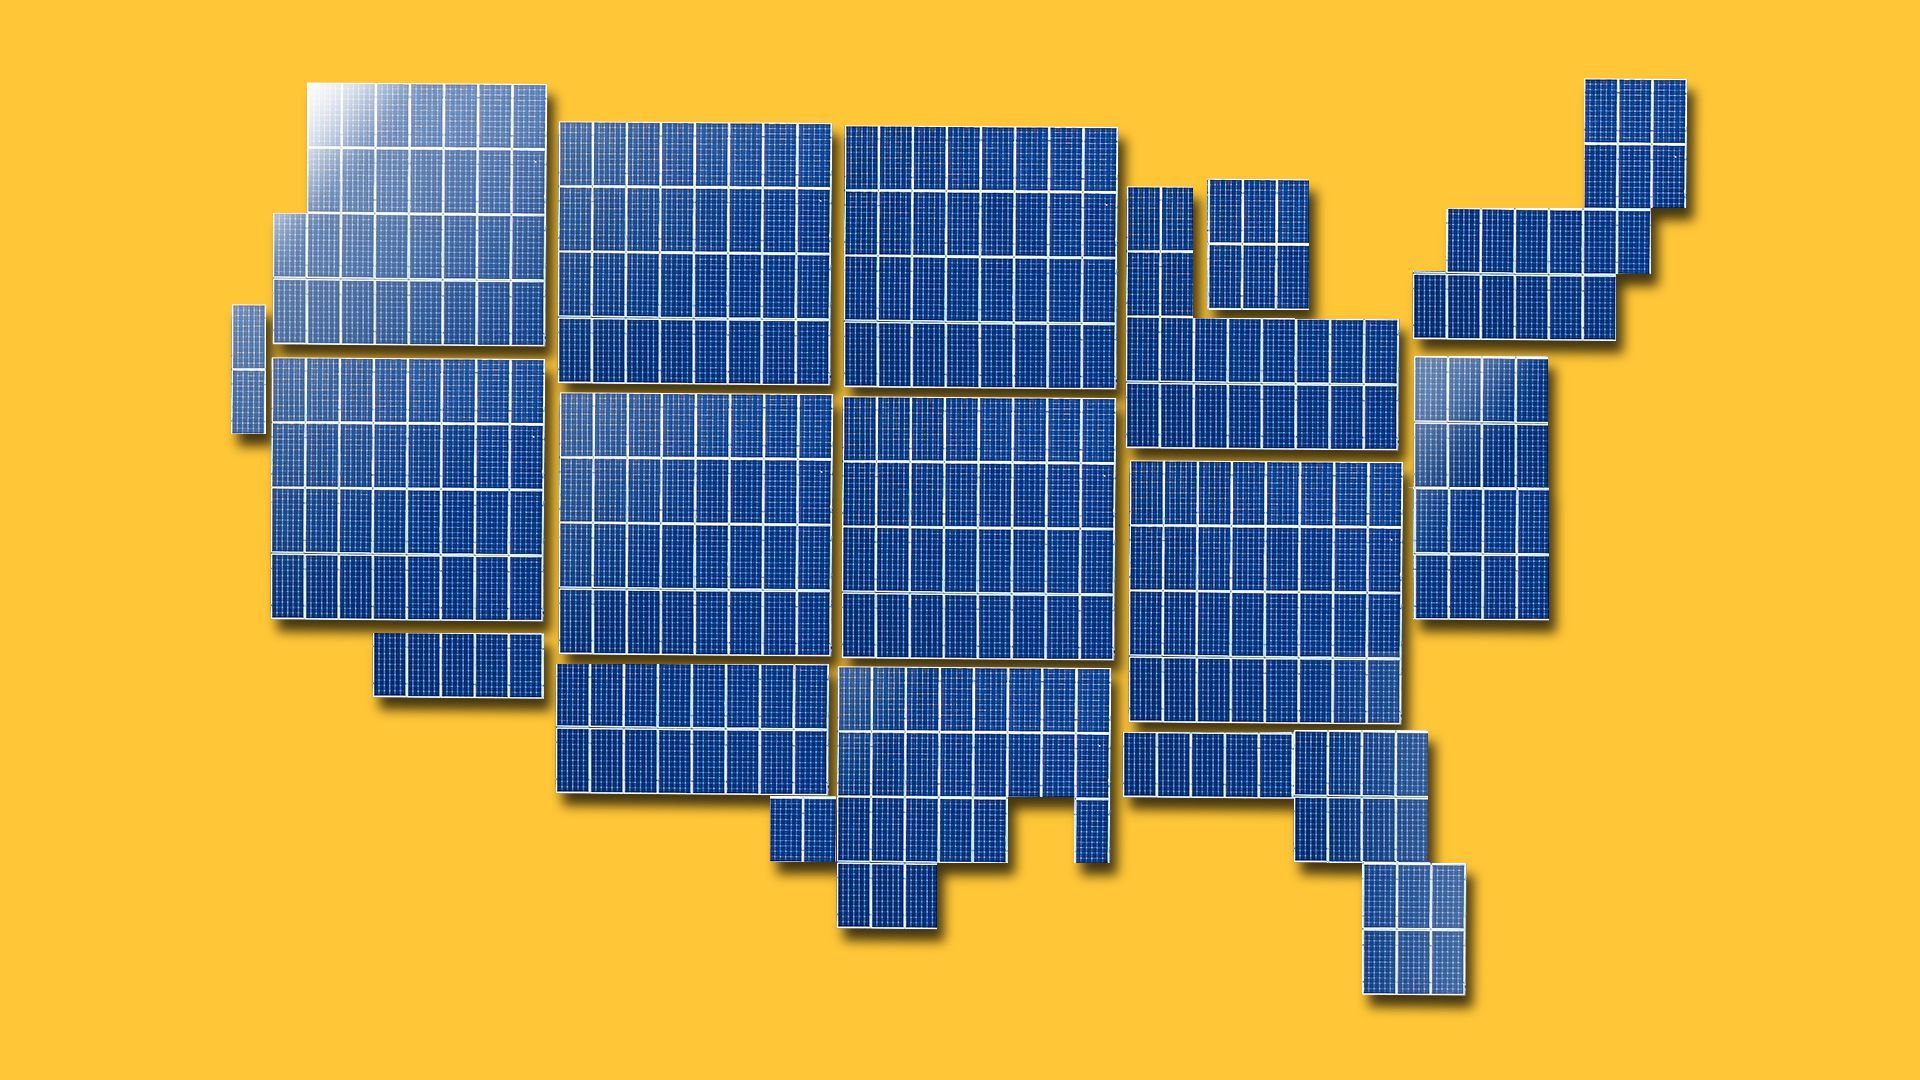 Illustration of a map of the United States comprised of solar panels